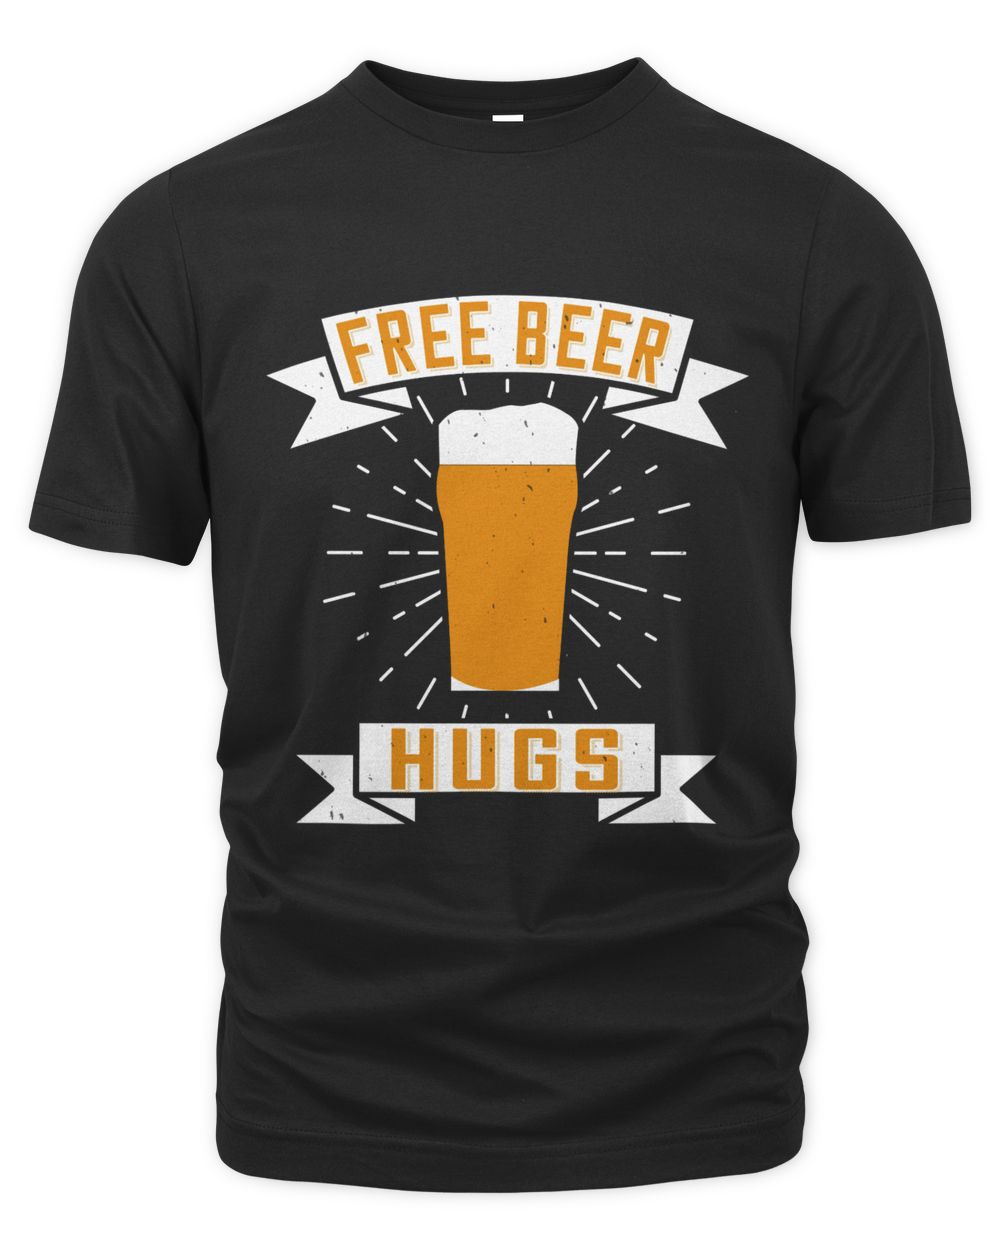 Free Beer Hugs Beer Shirt For Beer Lover With Free Shipping, Great Gift For Fathers Day Men's Premium Tshirt black 